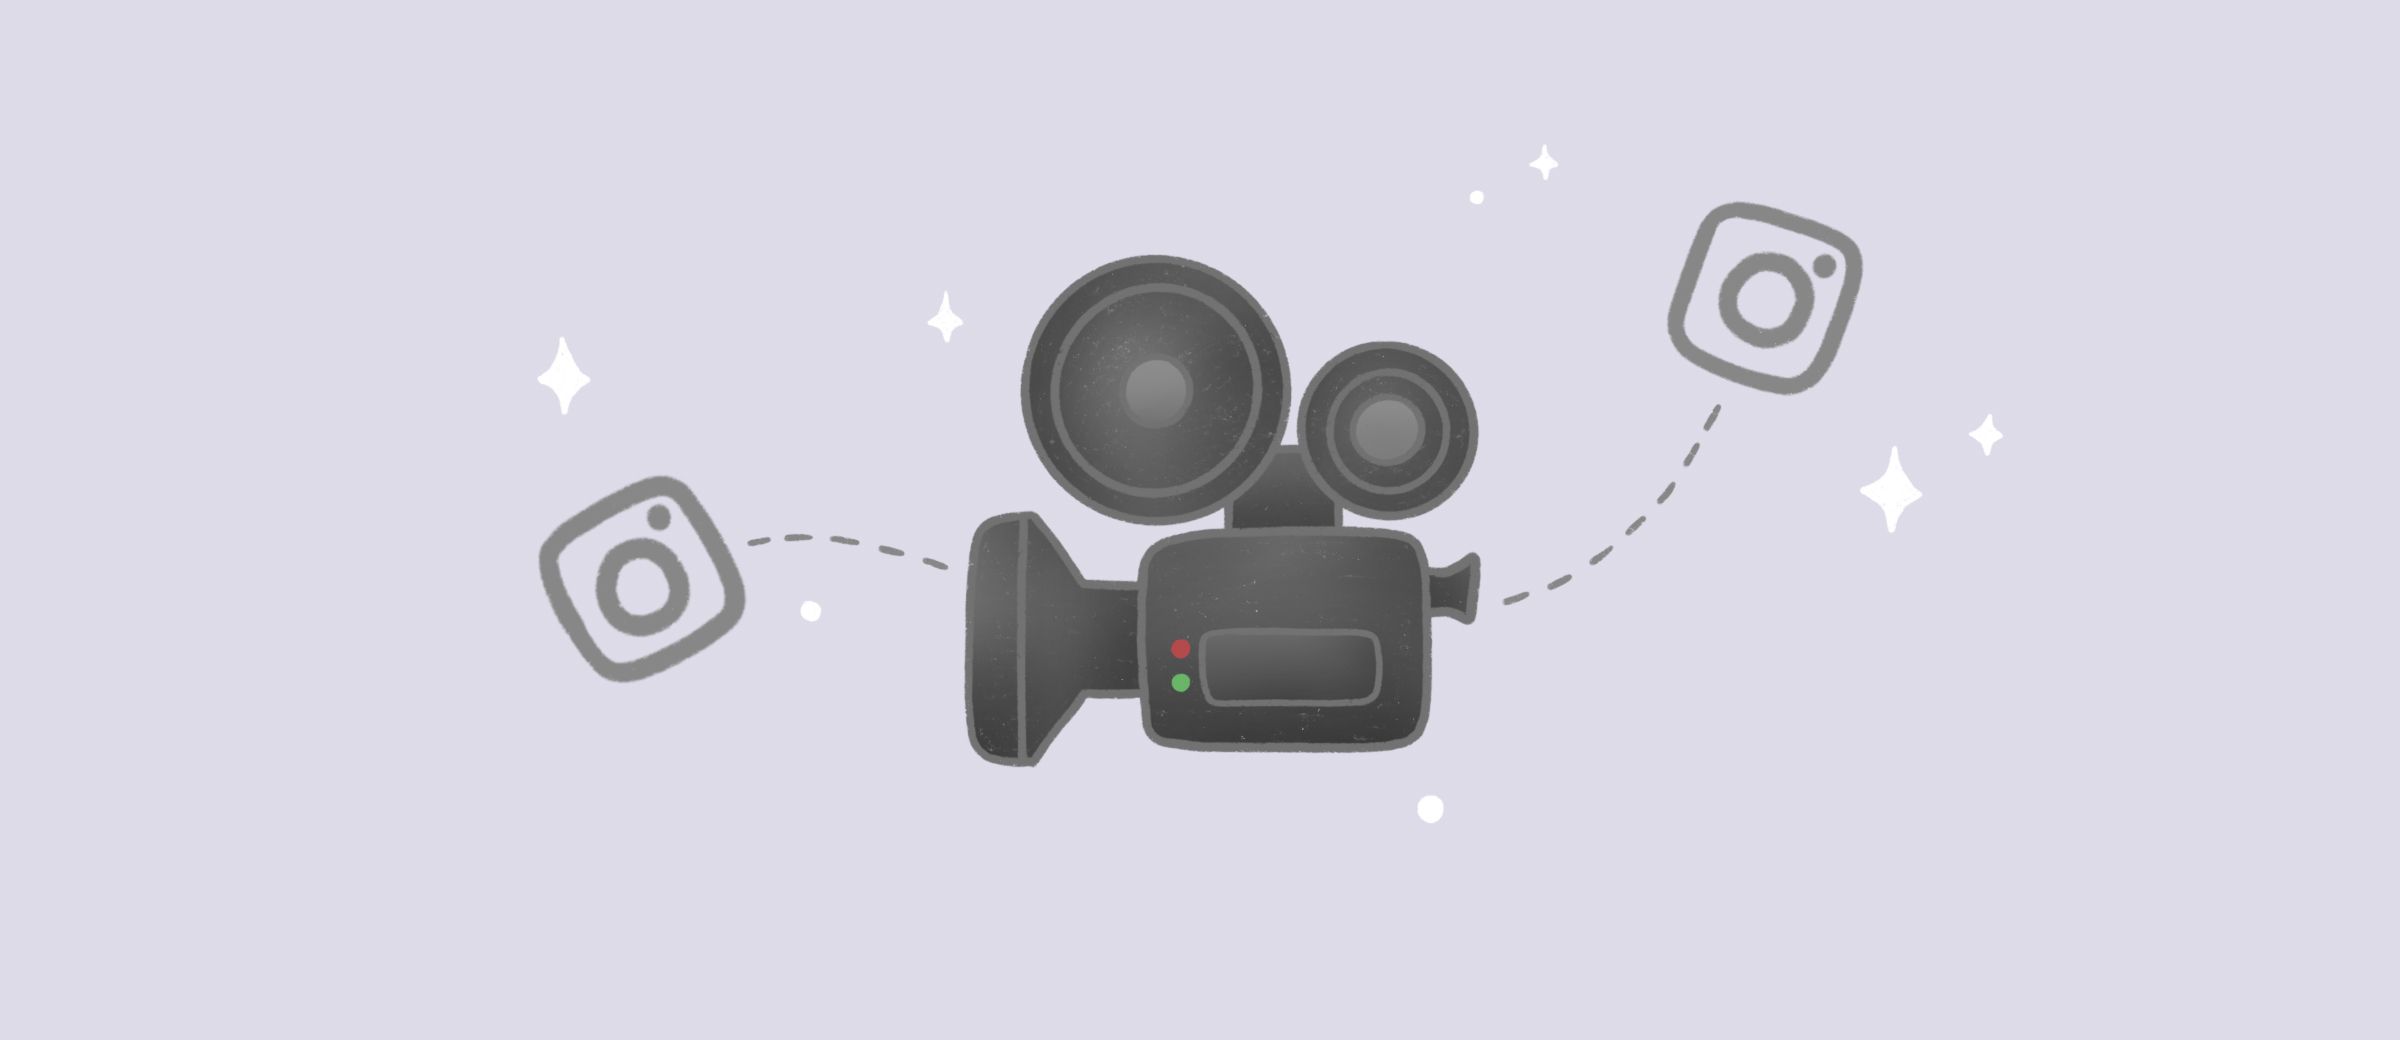 Read about 5 Tips on Improving Video Quality, on PLANOLY